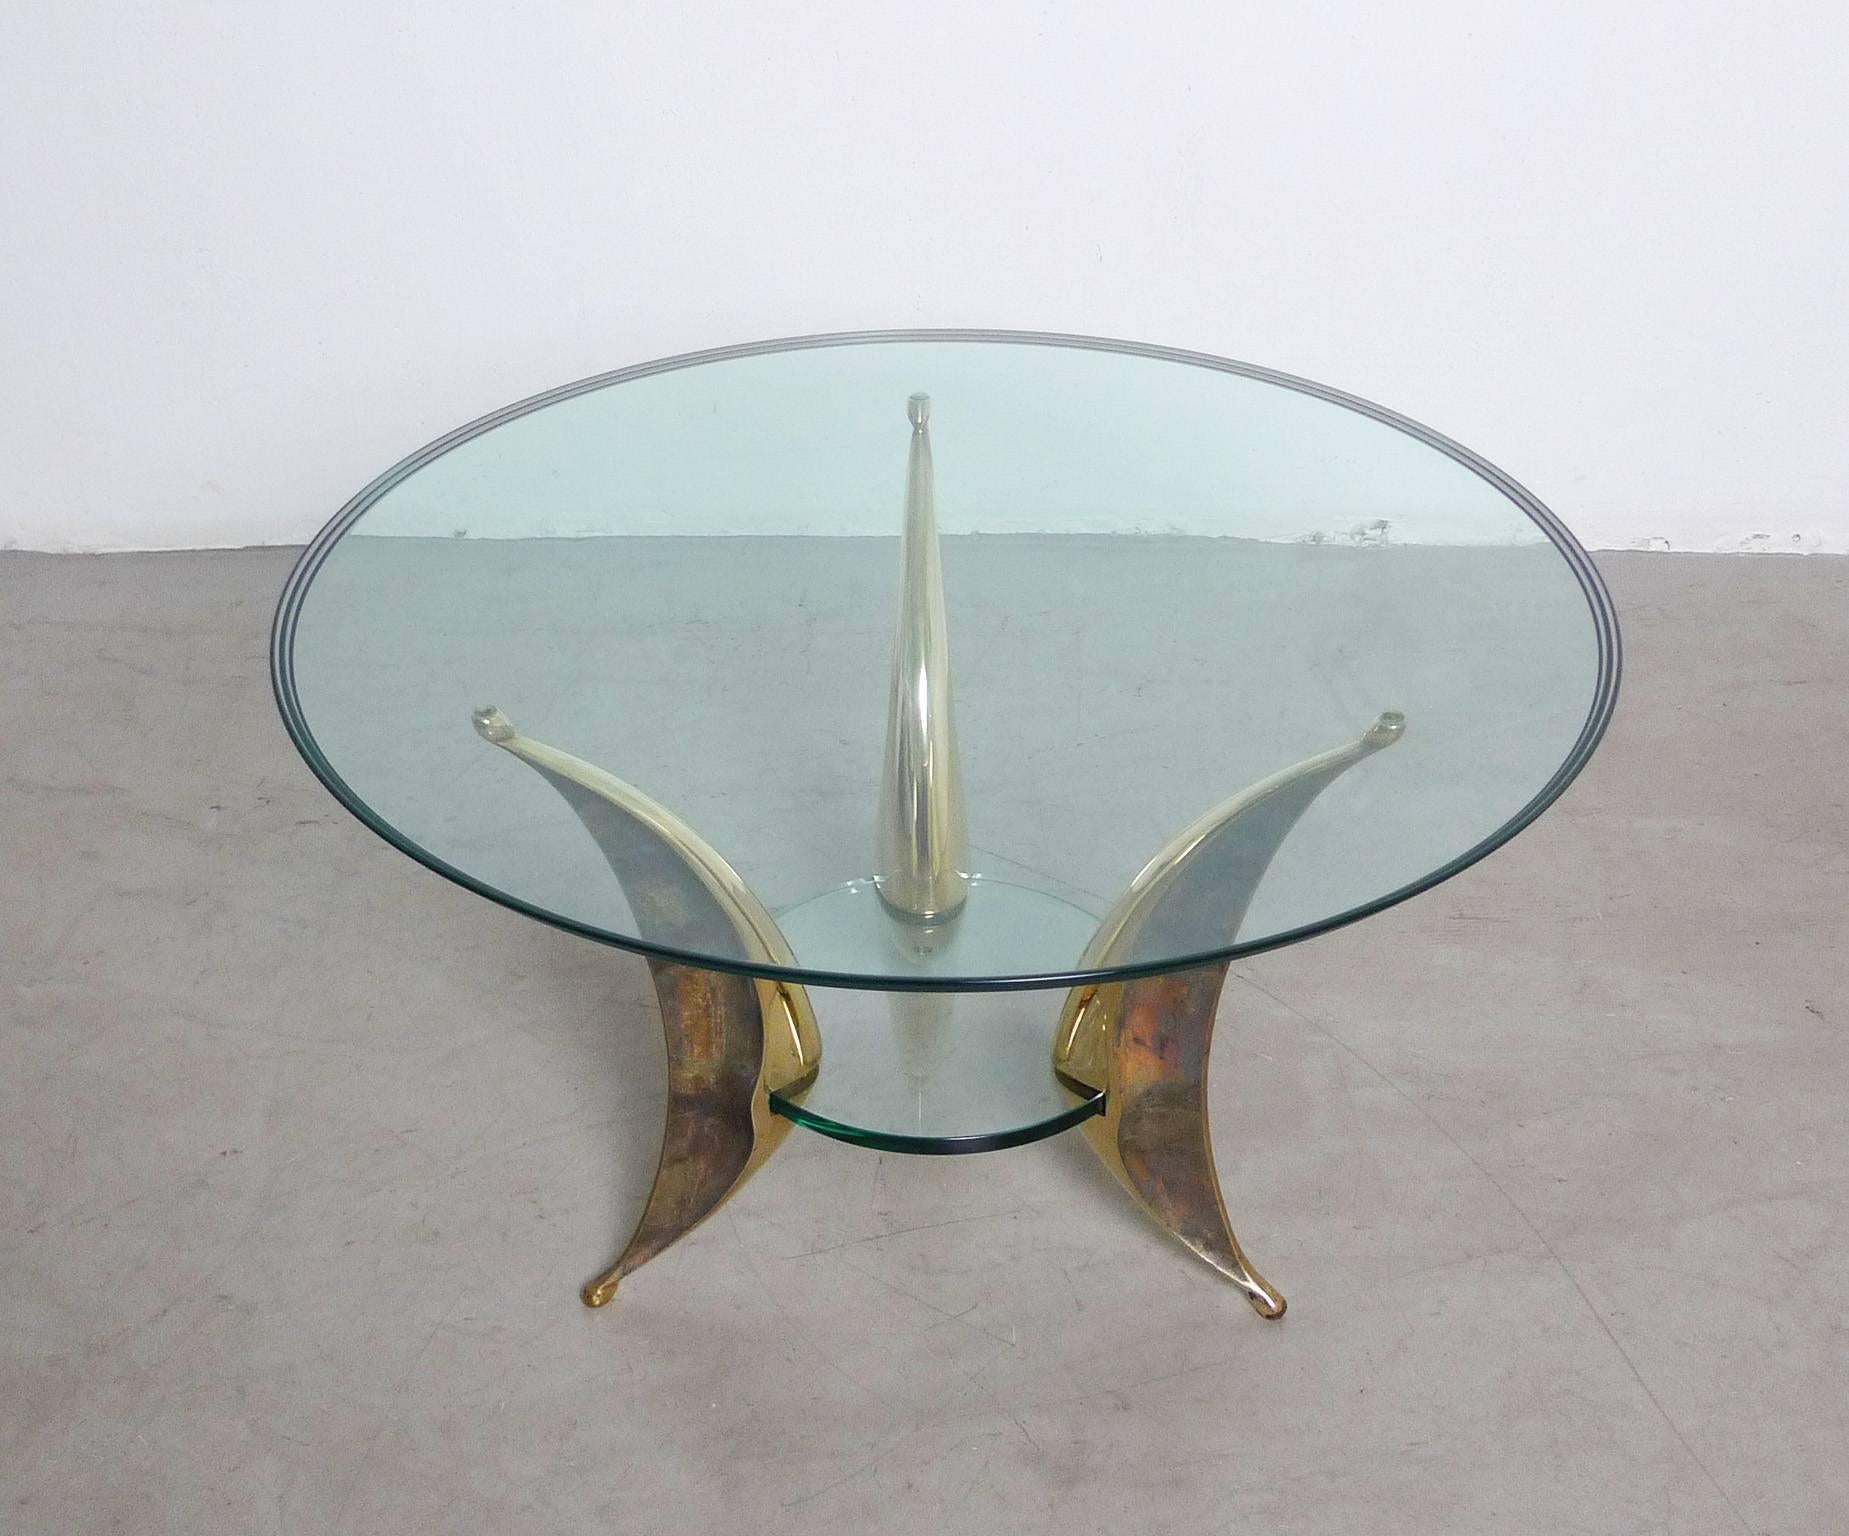 Sculptural Coffee Table with Massive Brass Feet and Two Glass Plates from Italy In Excellent Condition For Sale In Berlin, DE